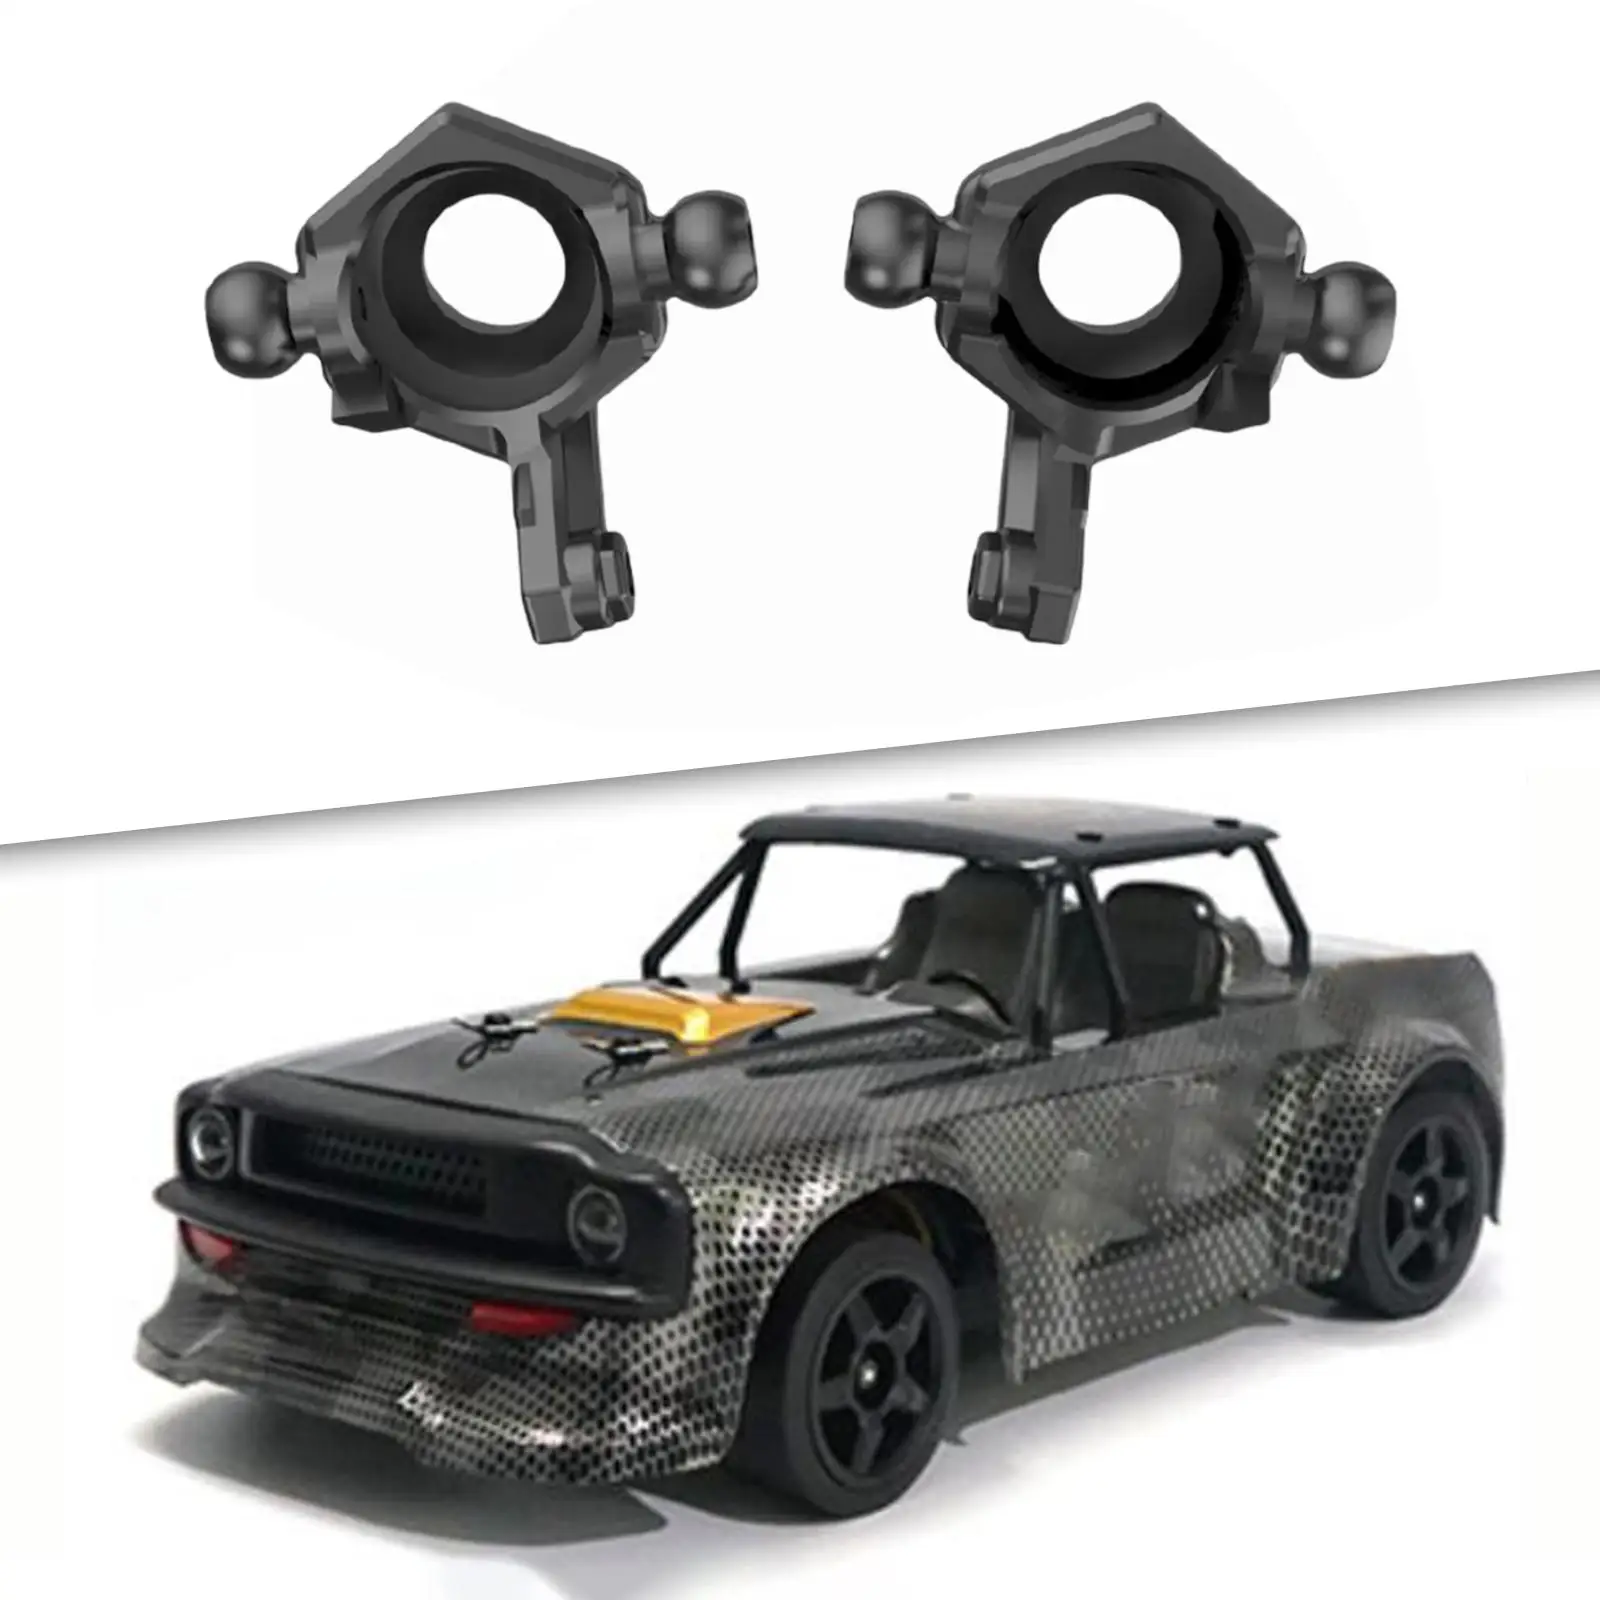 1 Pair Plastic RC Car Front Hub Carrier for SG1603 SG-1603 SG-1604 1/16 2.4G Remote Control Car Truck Hobby Model Vehicle